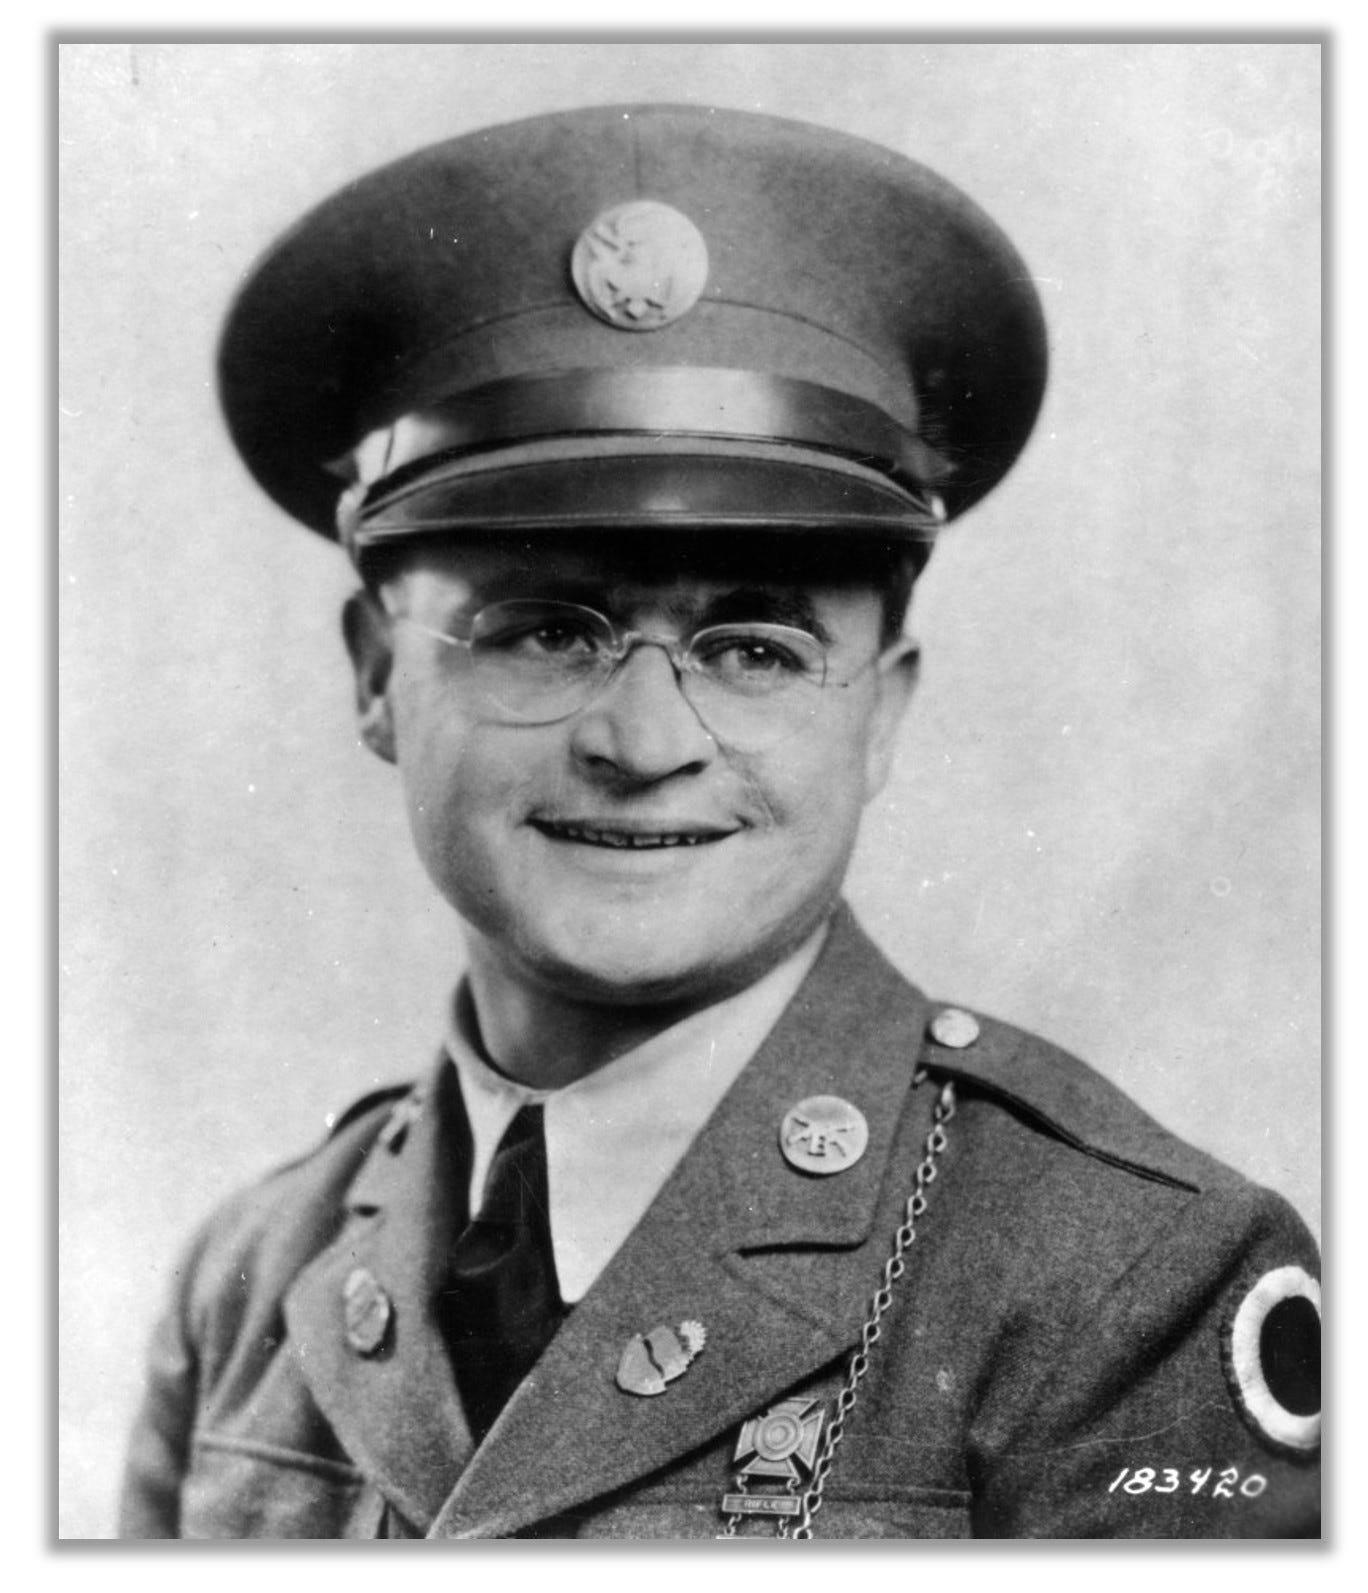 Black and white photo of Rodger Young in uniform.  He is wearing glasses that make him look more like a professor than a military hero.